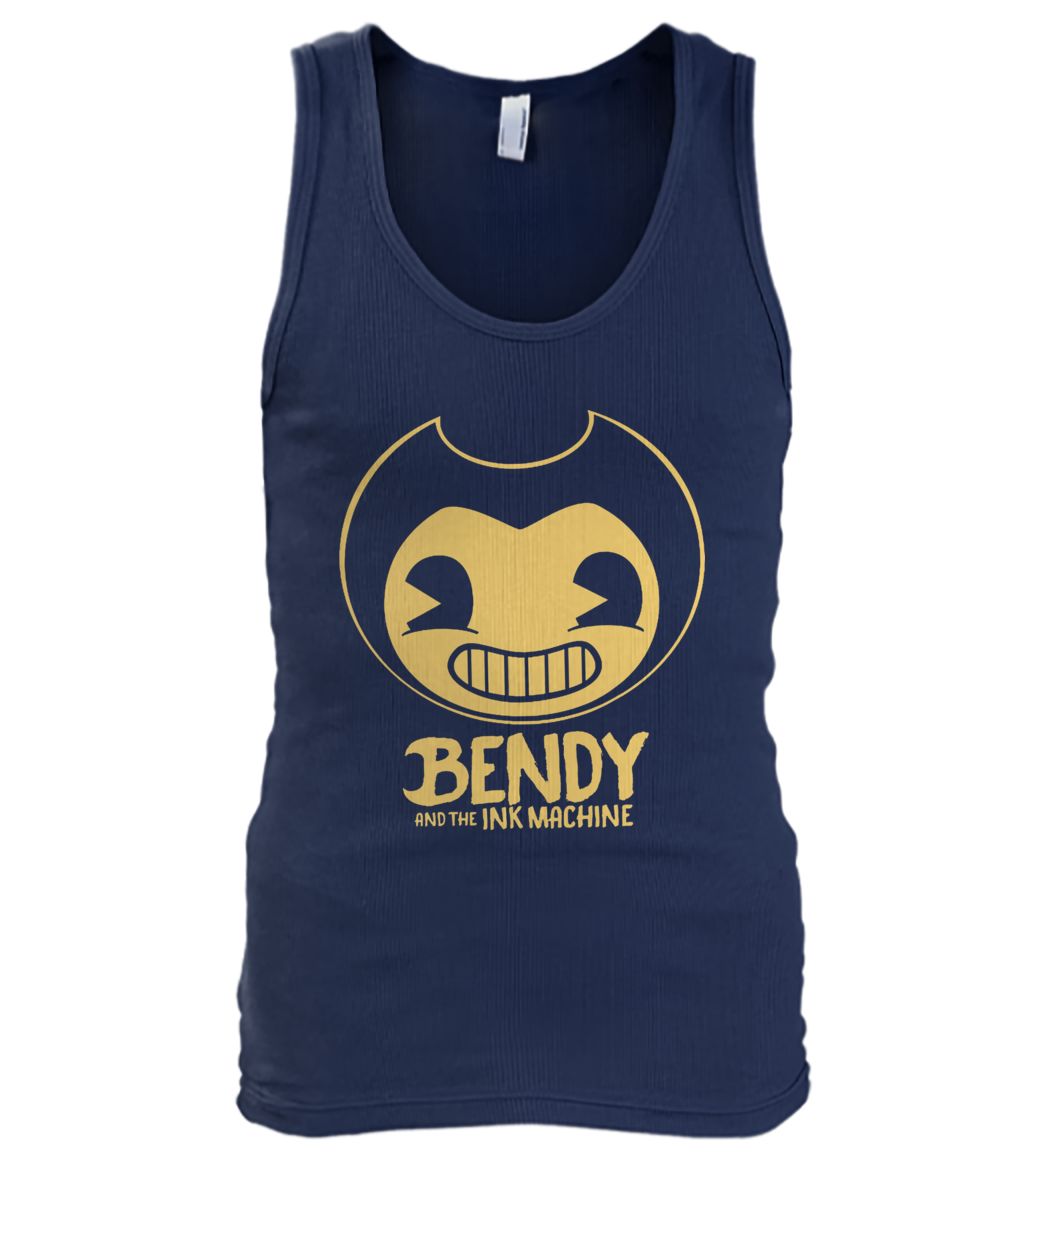 Bendy and the ink machine logo men's tank top